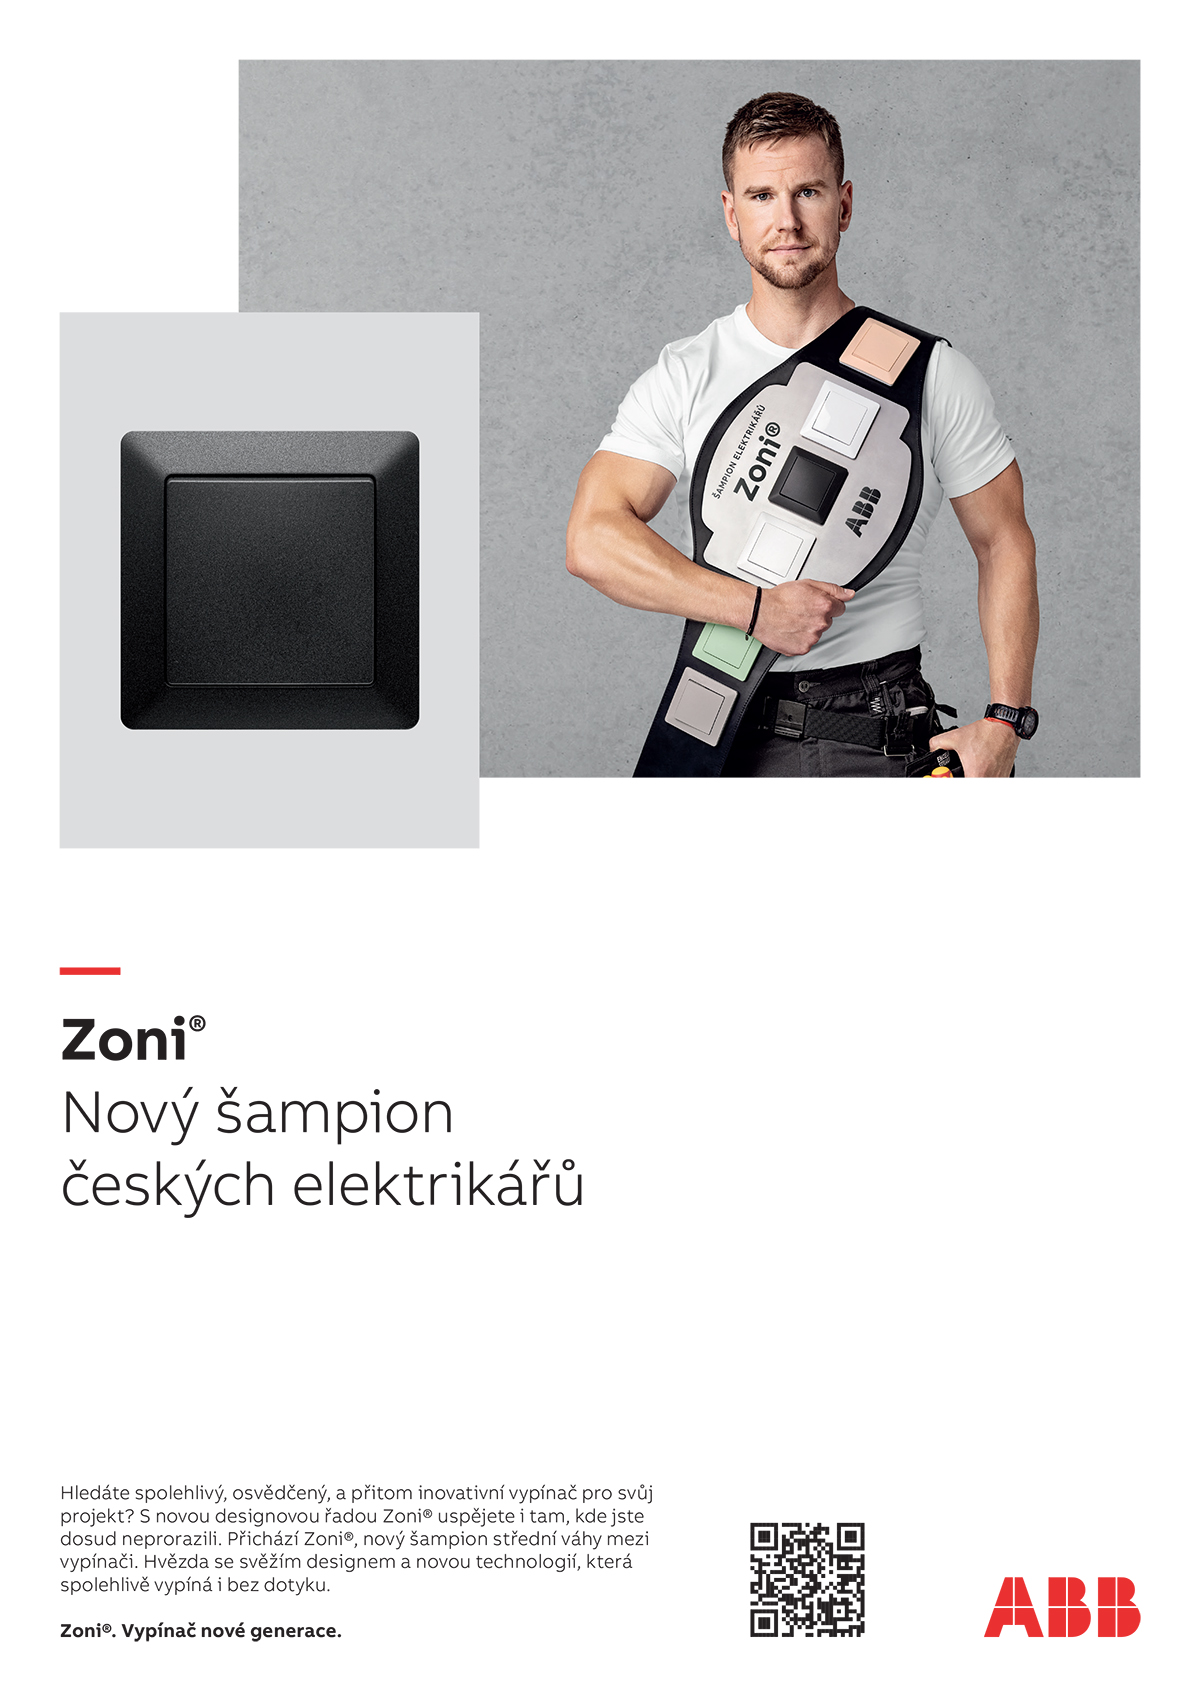 Zoni_A4_Product_Ad-(1).jpg